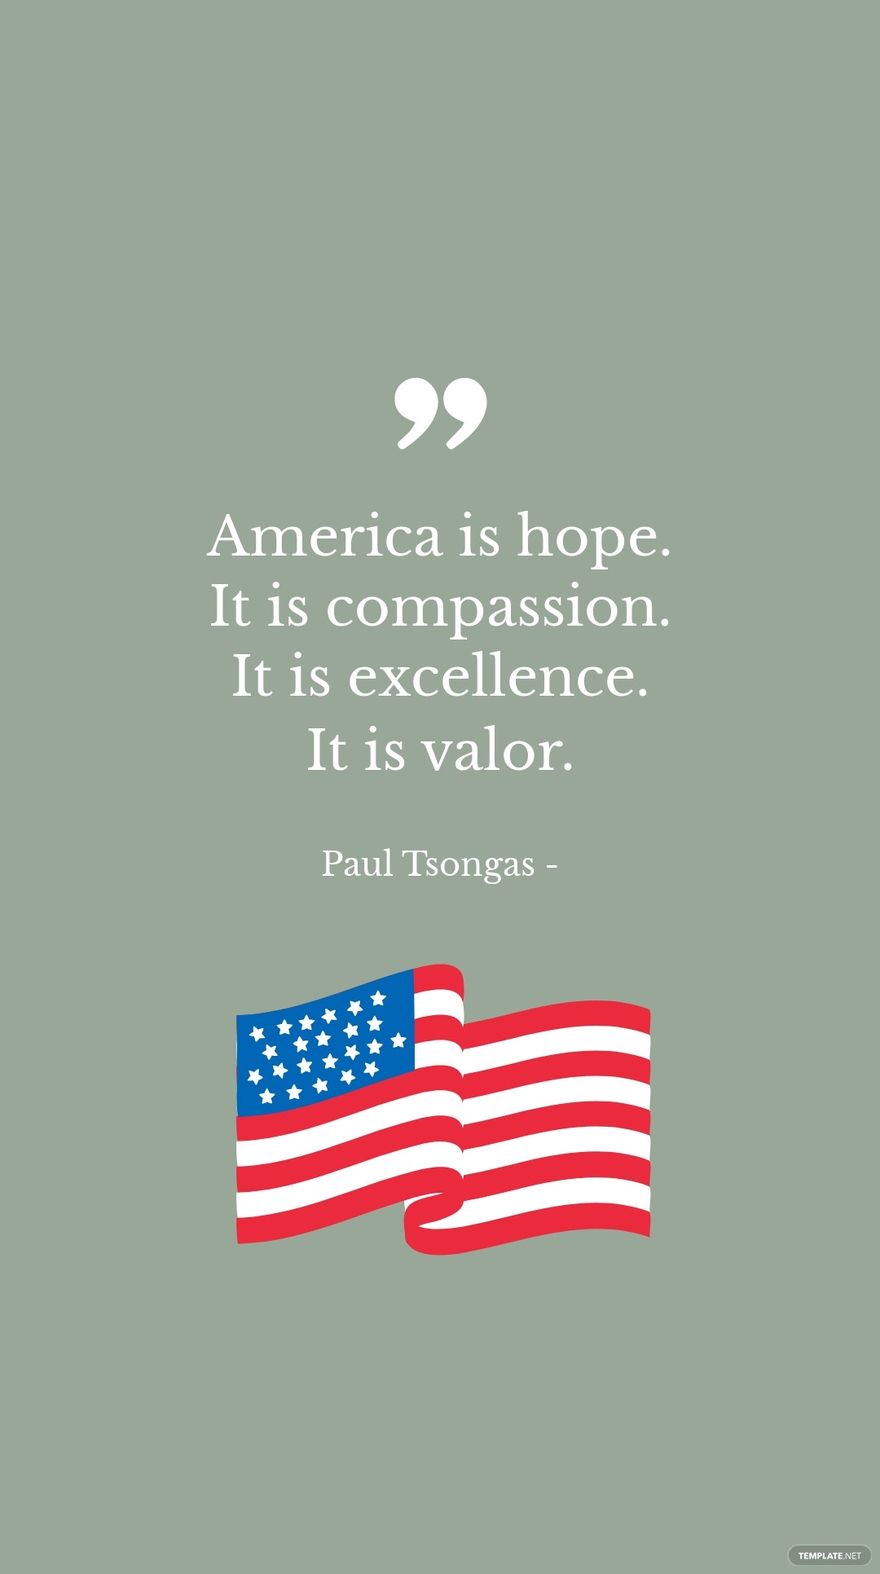 Free Paul Tsongas - America is hope. It is compassion. It is excellence. It is valor.